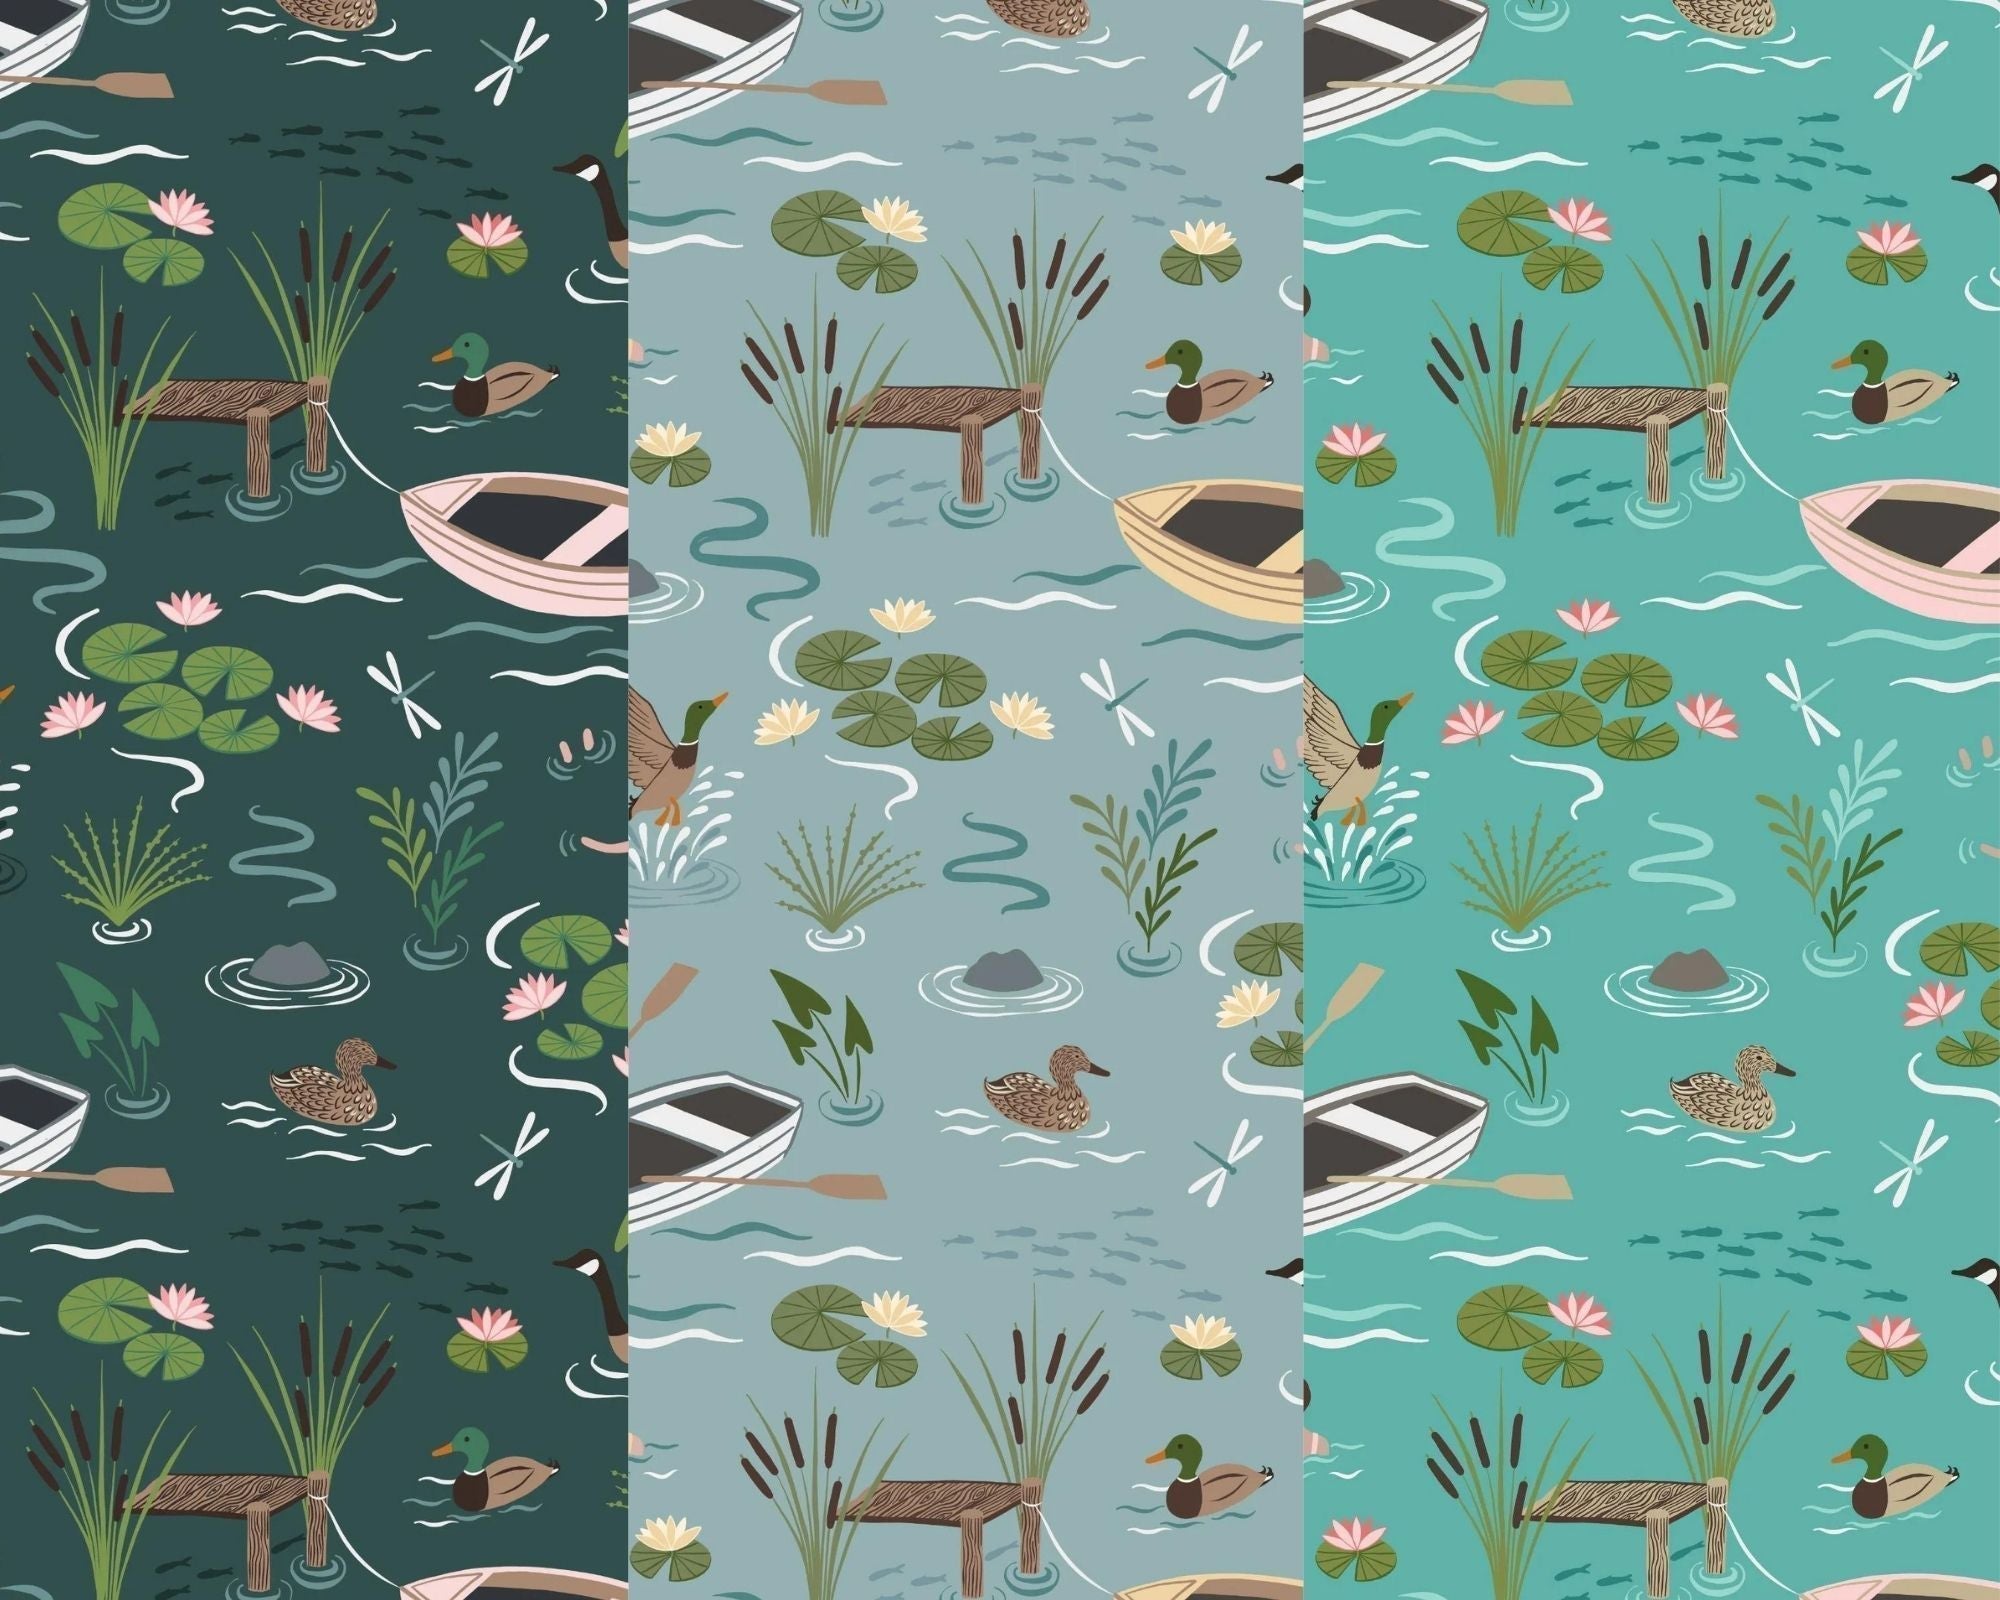 Lake Ripples on dark turquoise cotton fabric - On the Lake by Lewis & Irene